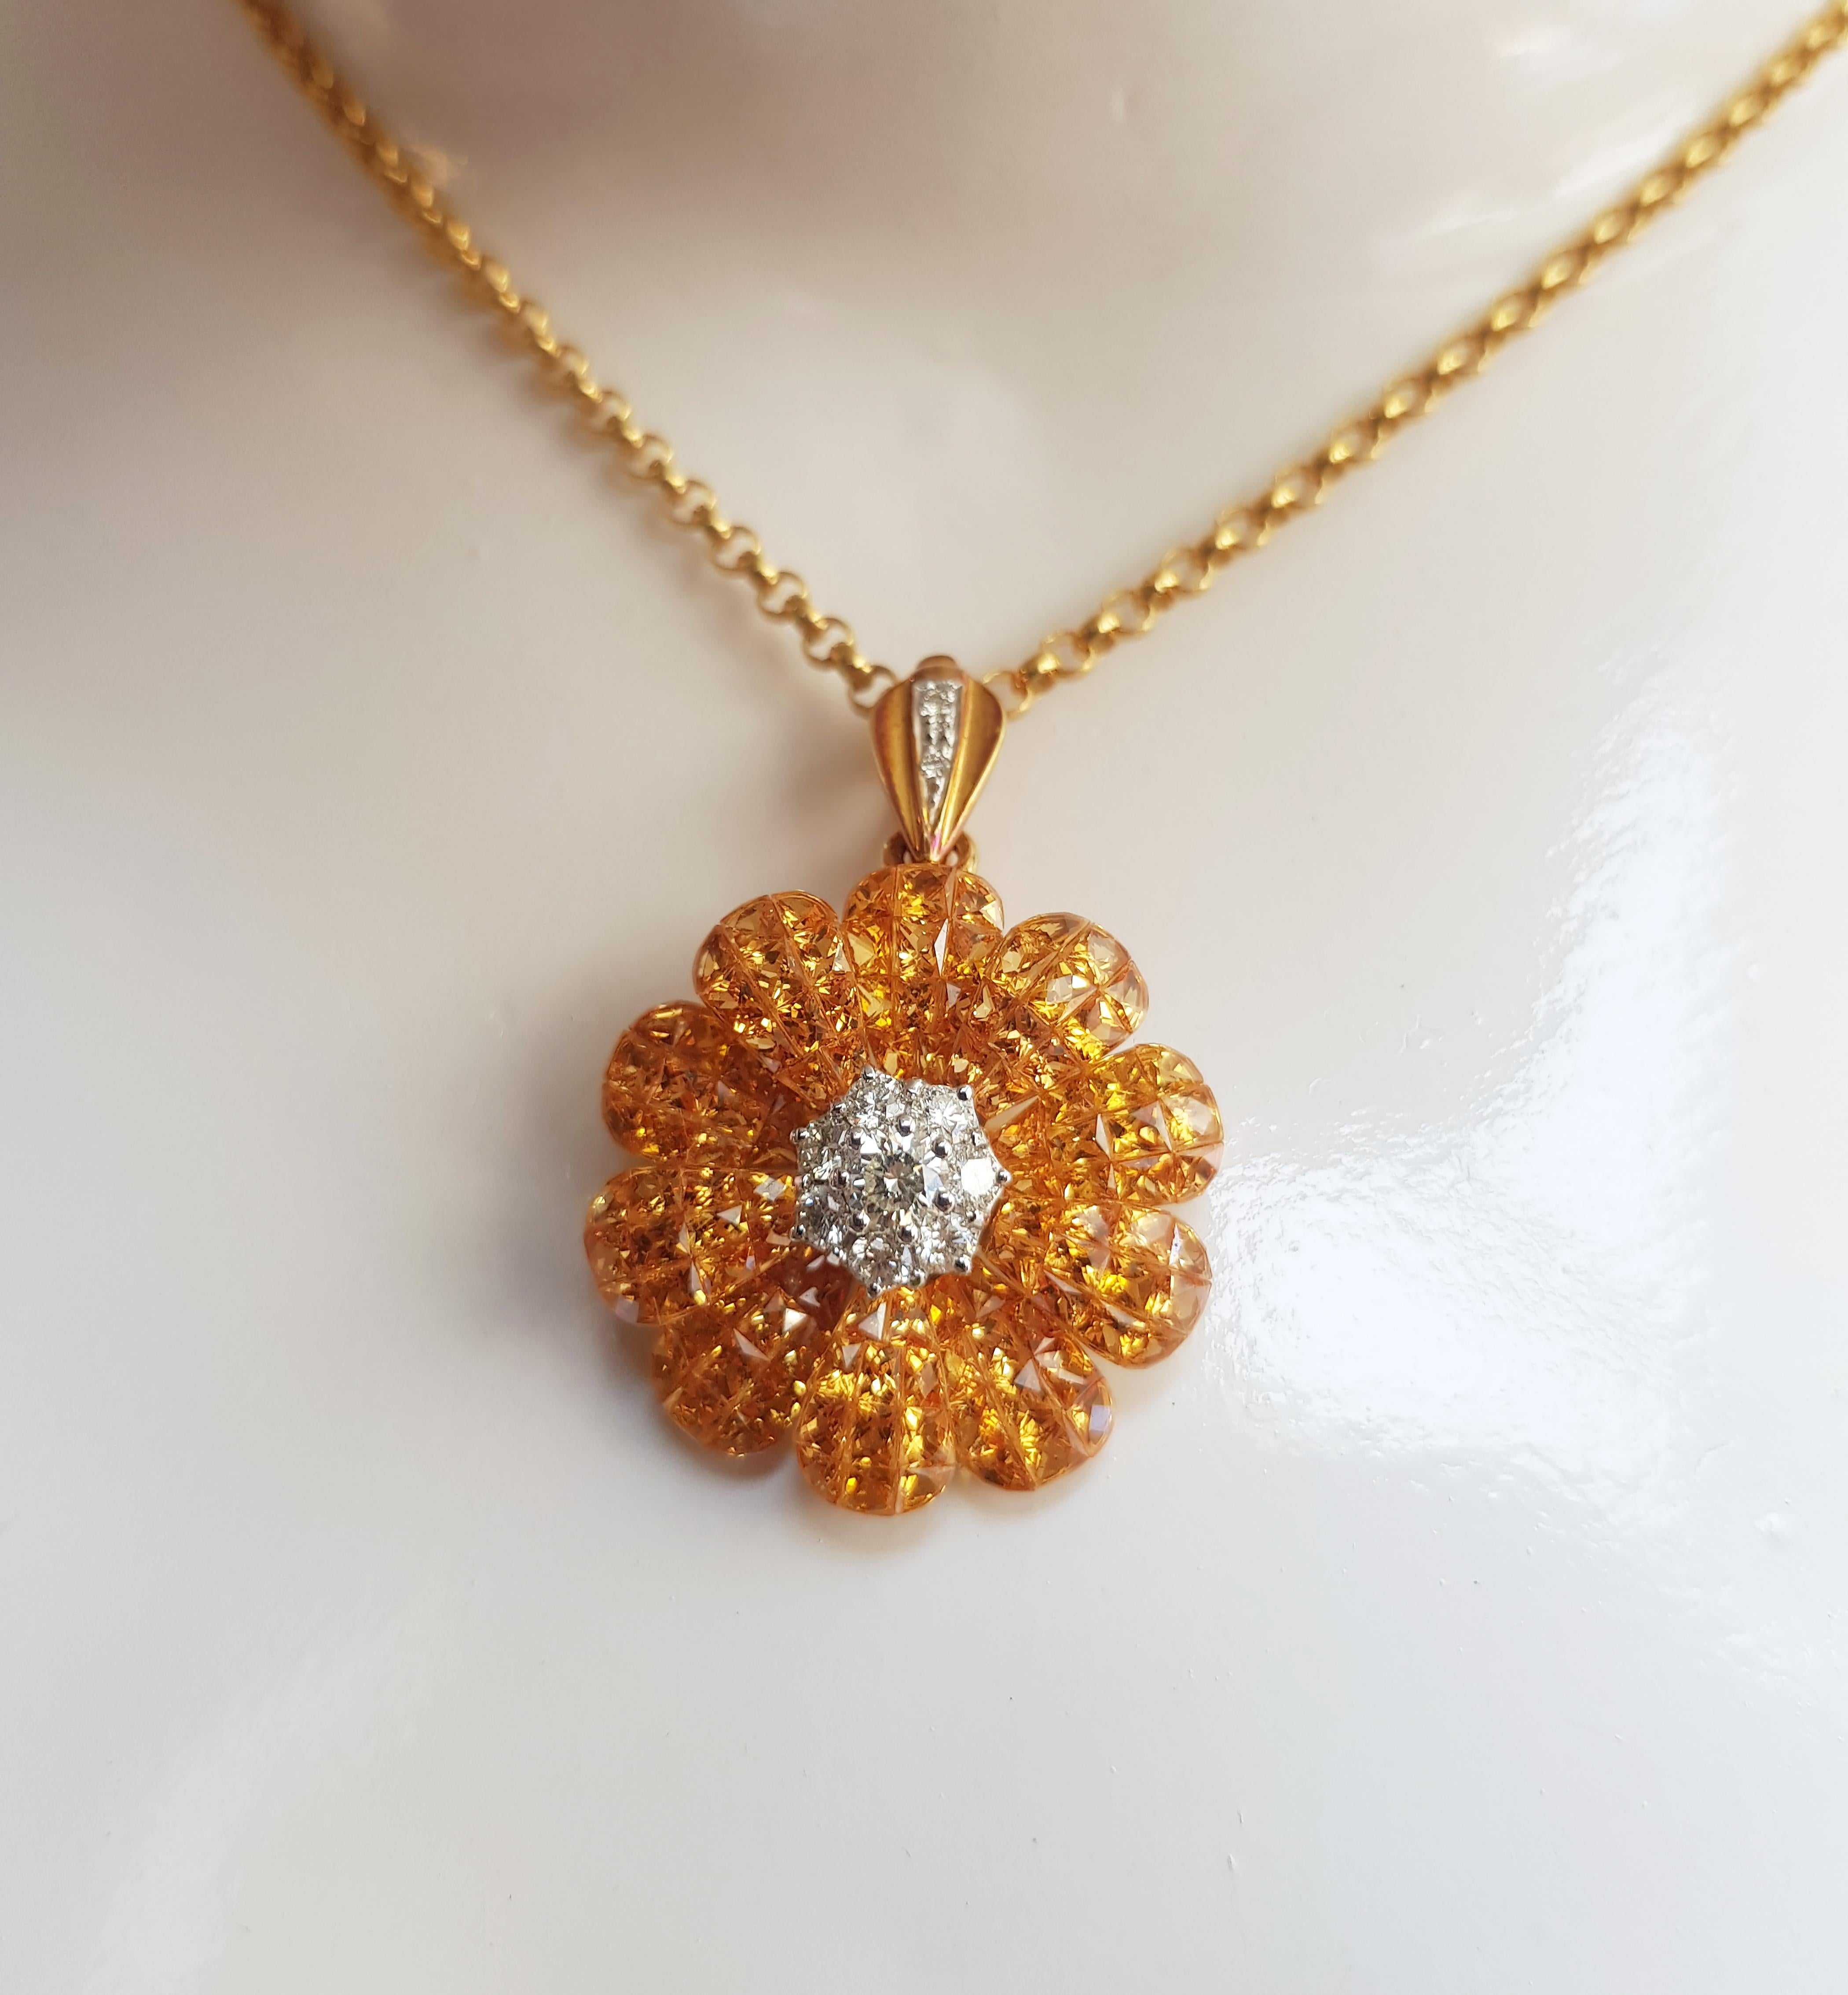 Yellow Sapphire 9.91 carats with Diamond  0.67 carat Brooch/Pendant set in 18 Karat Gold Settings
(chain not included)

Width: 2.6 cm
Length: 4.0 cm 

